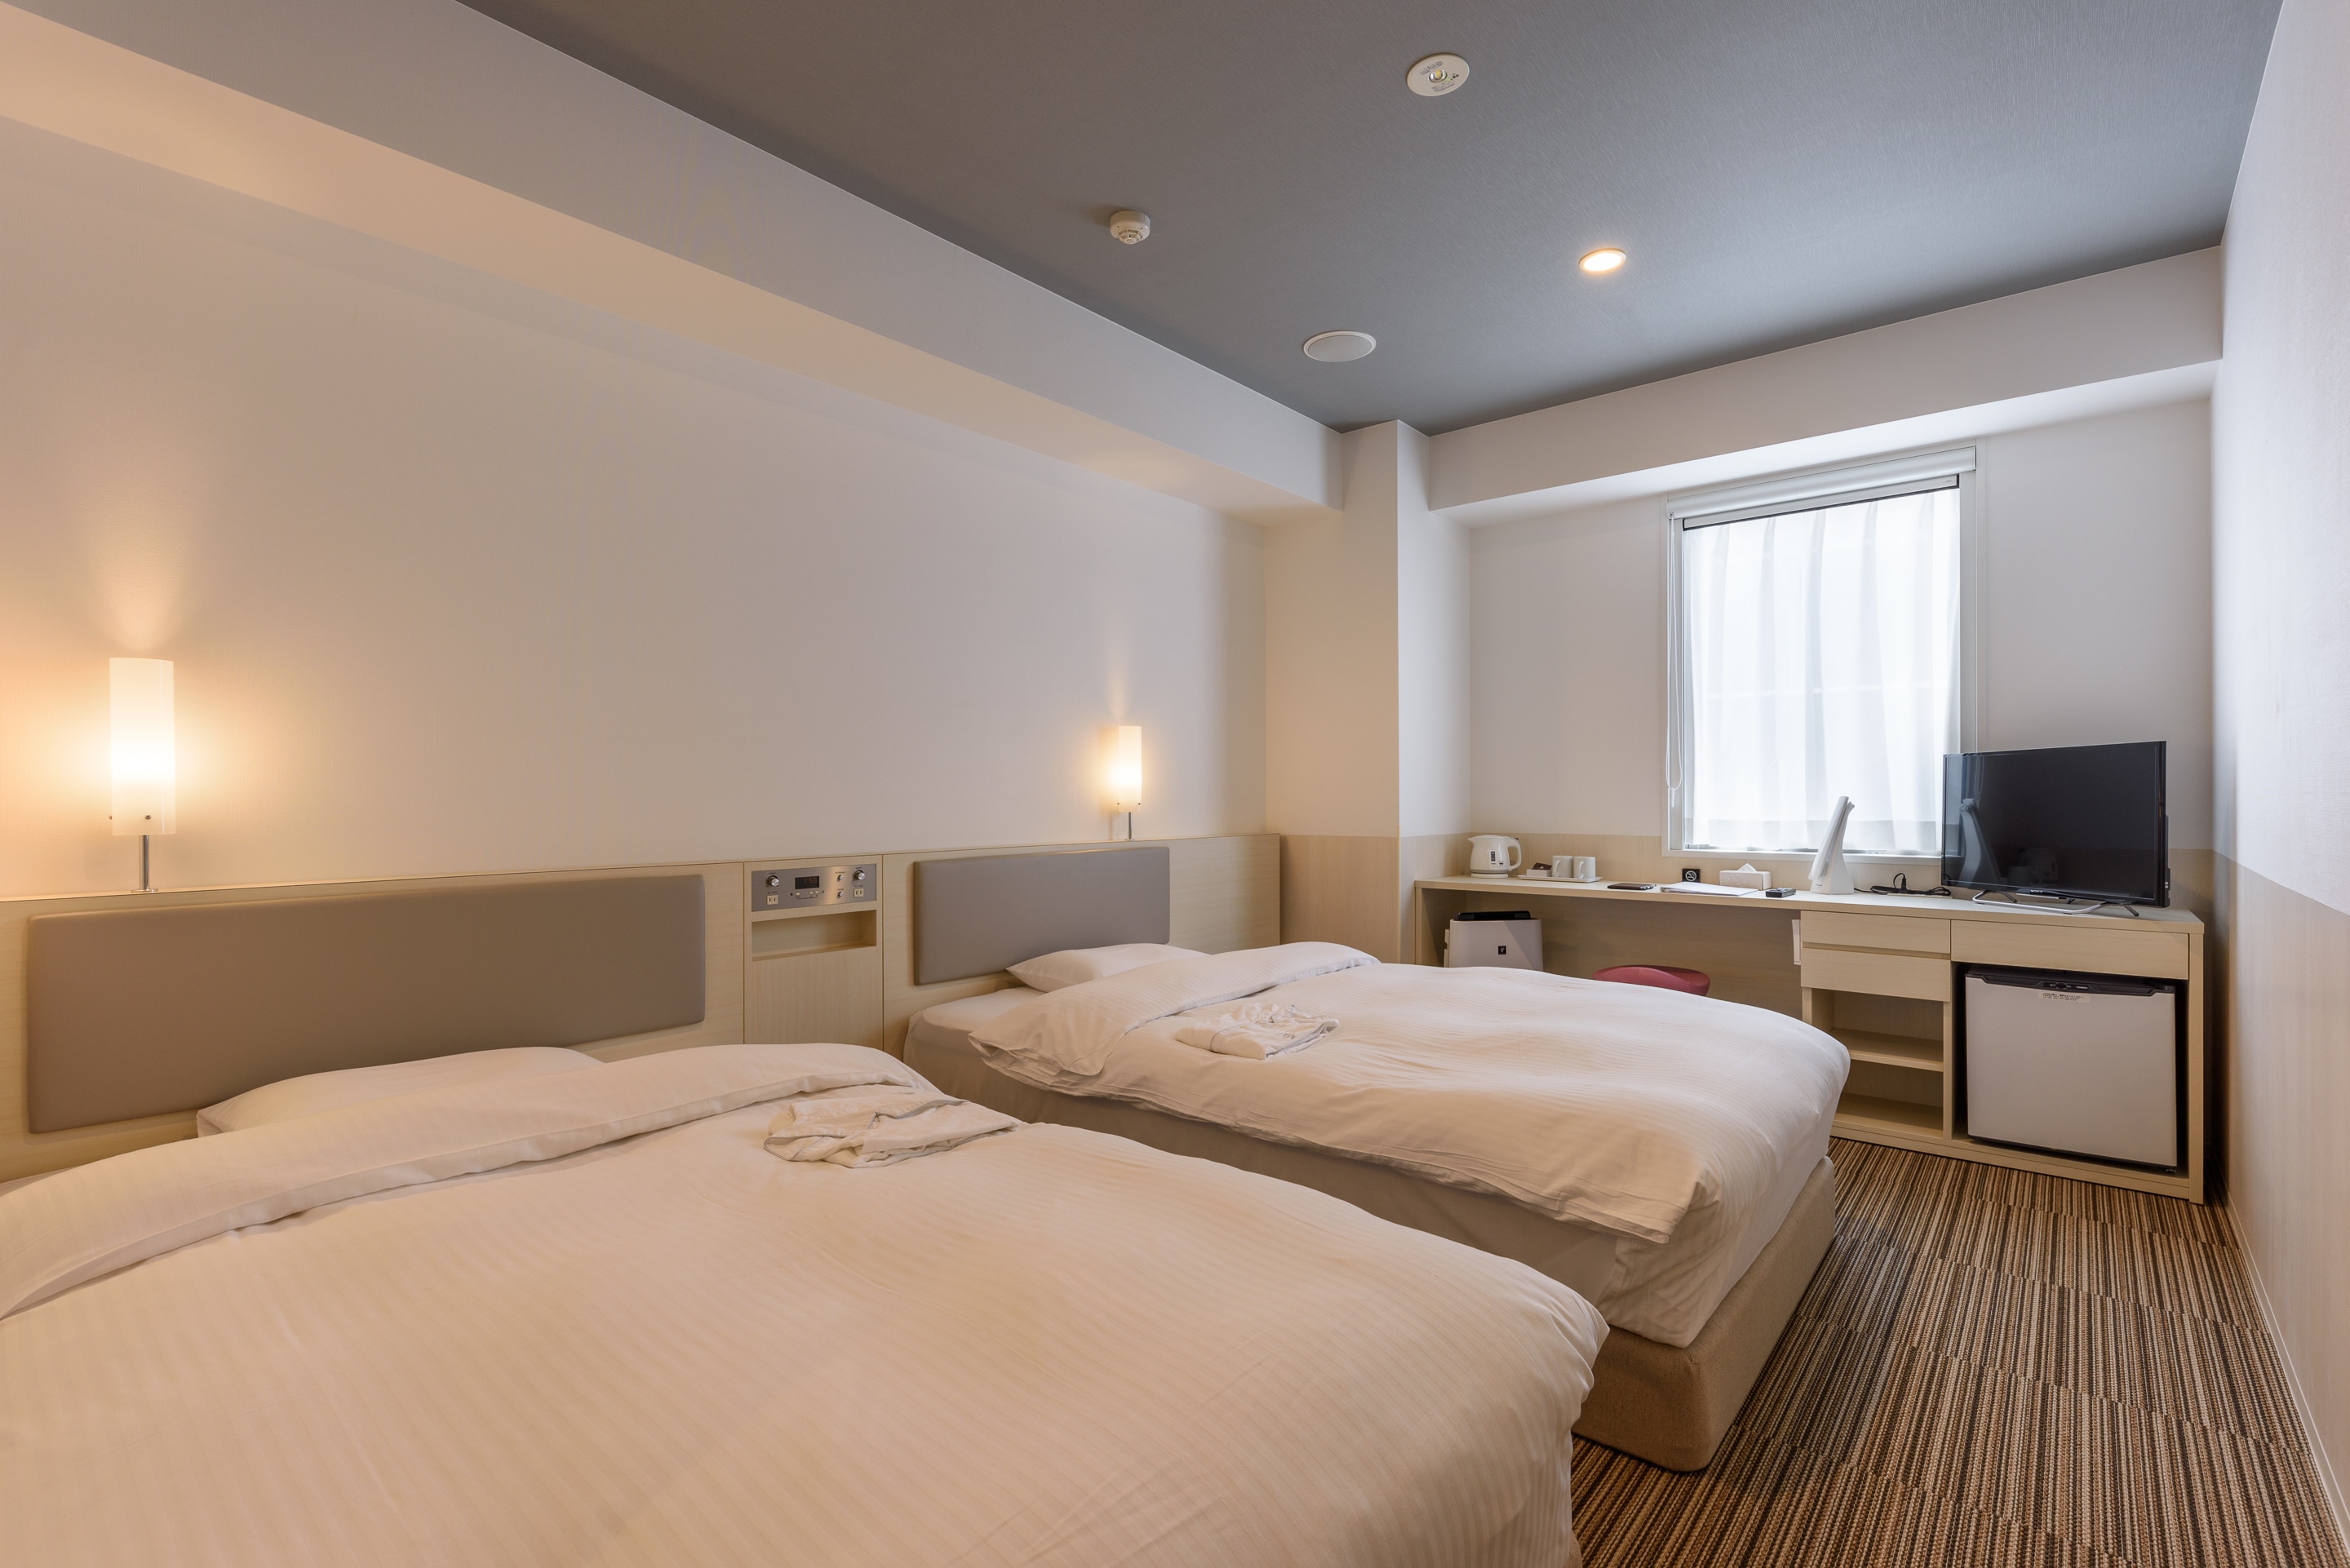 "Room" ◇ Twin B ◇ Area 21.71㎡ / Bed width 122cm & times; 2 units & lt; No smoking & gt;